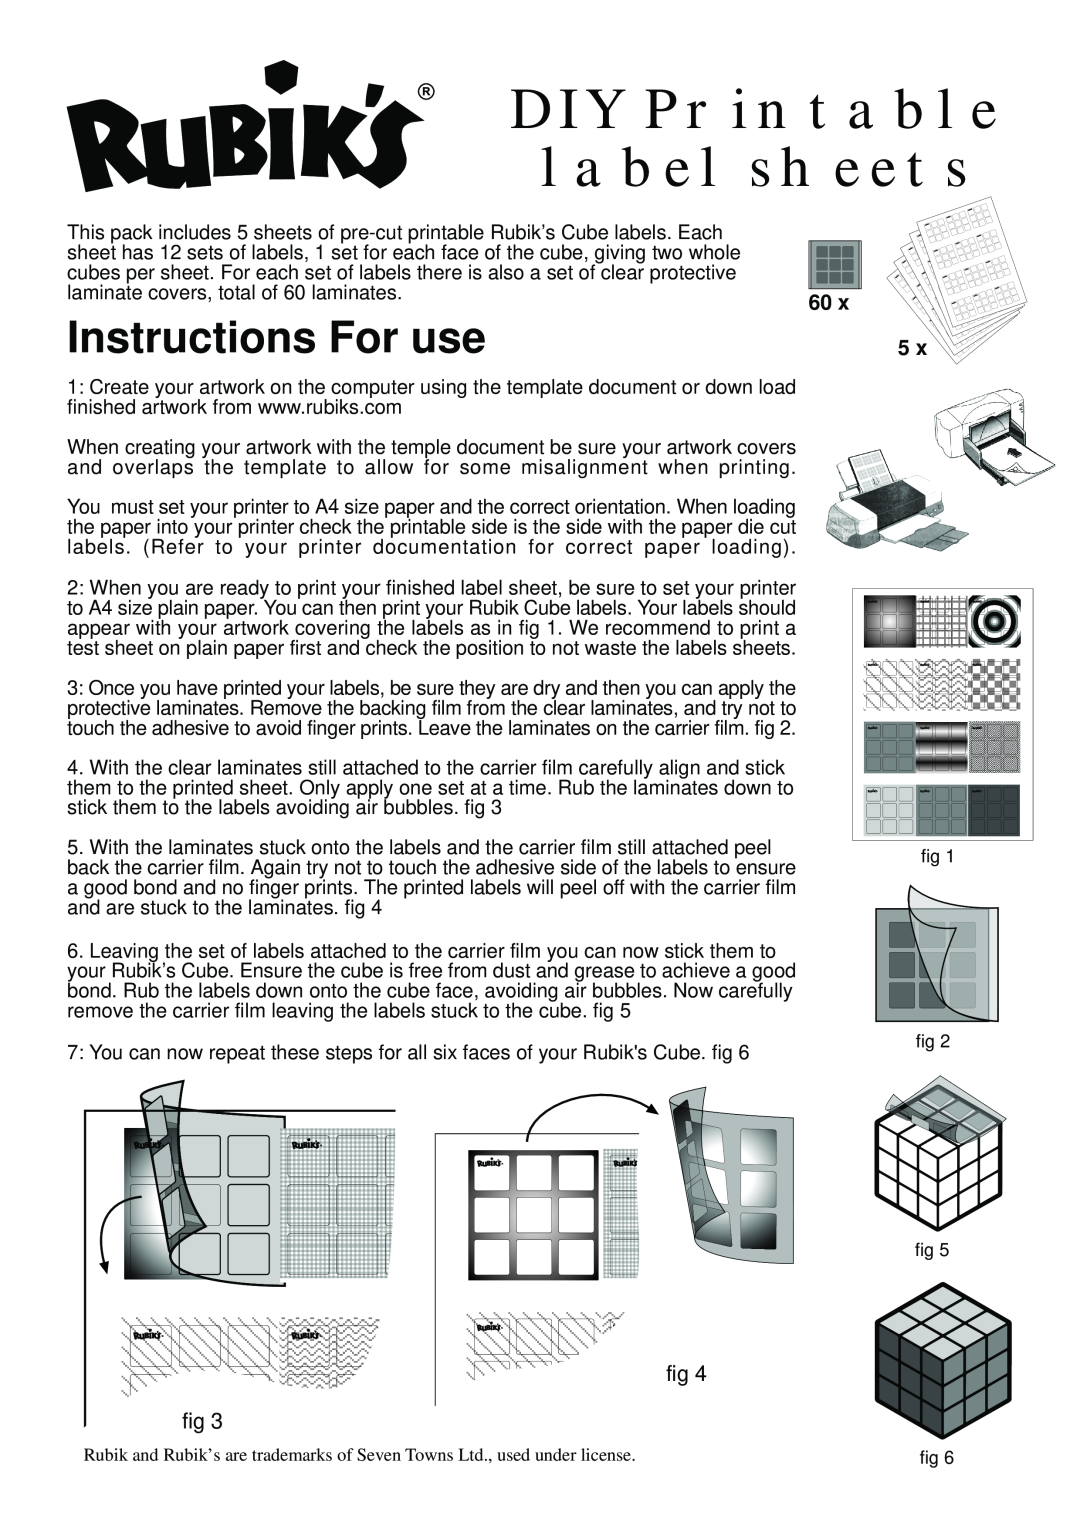 Rubik's CUBE manual DIY Printable label sheets, Instructions For use 